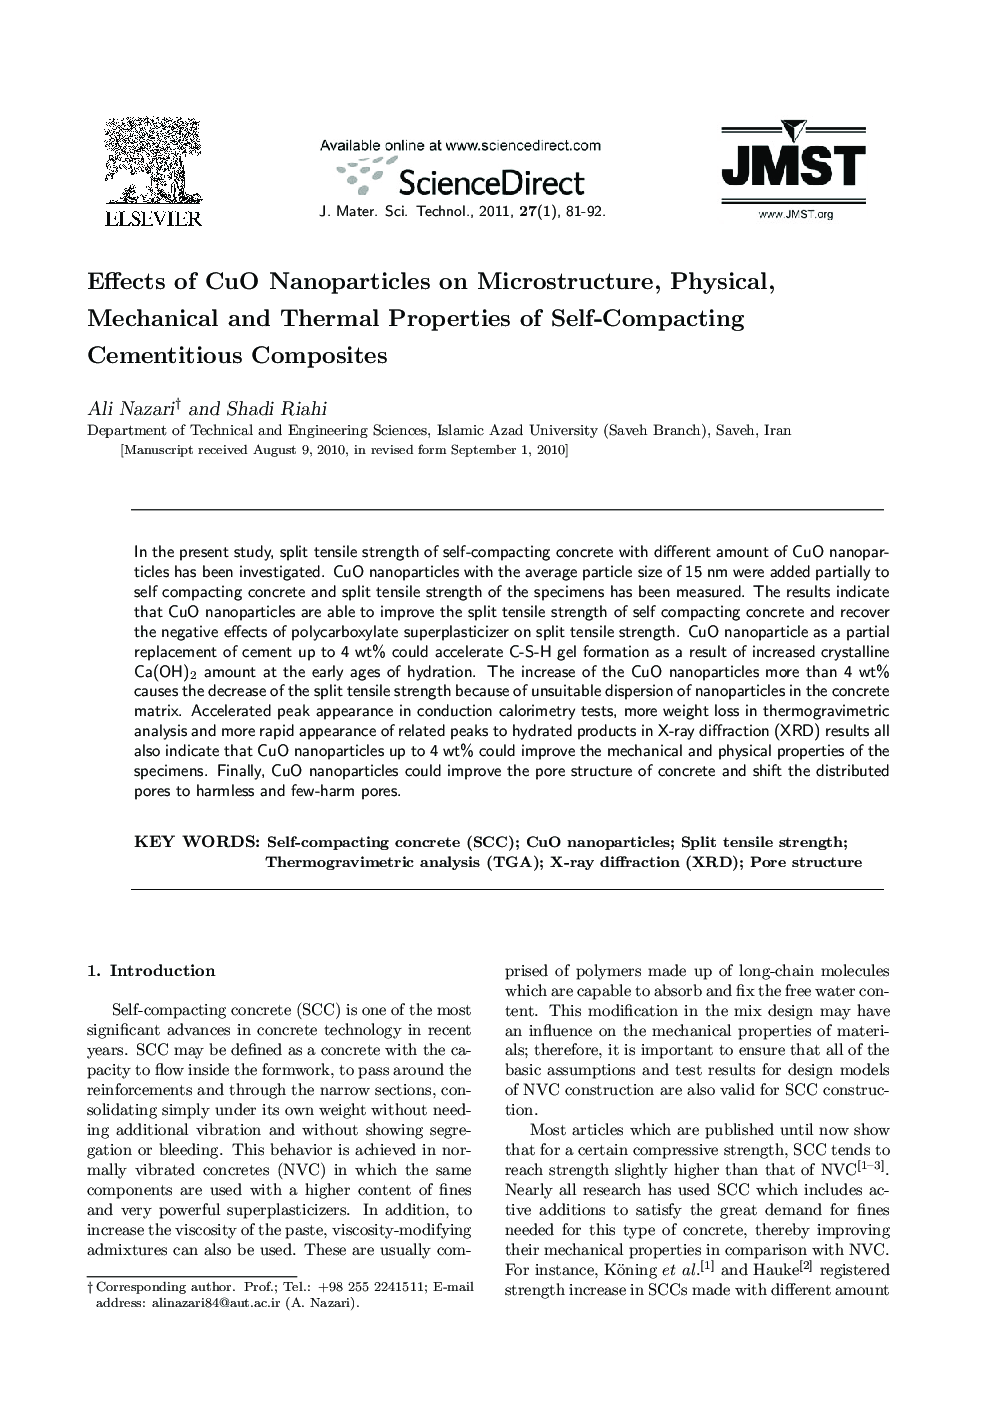 Effects of CuO Nanoparticles on Microstructure, Physical, Mechanical and Thermal Properties of Self-Compacting Cementitious Composites